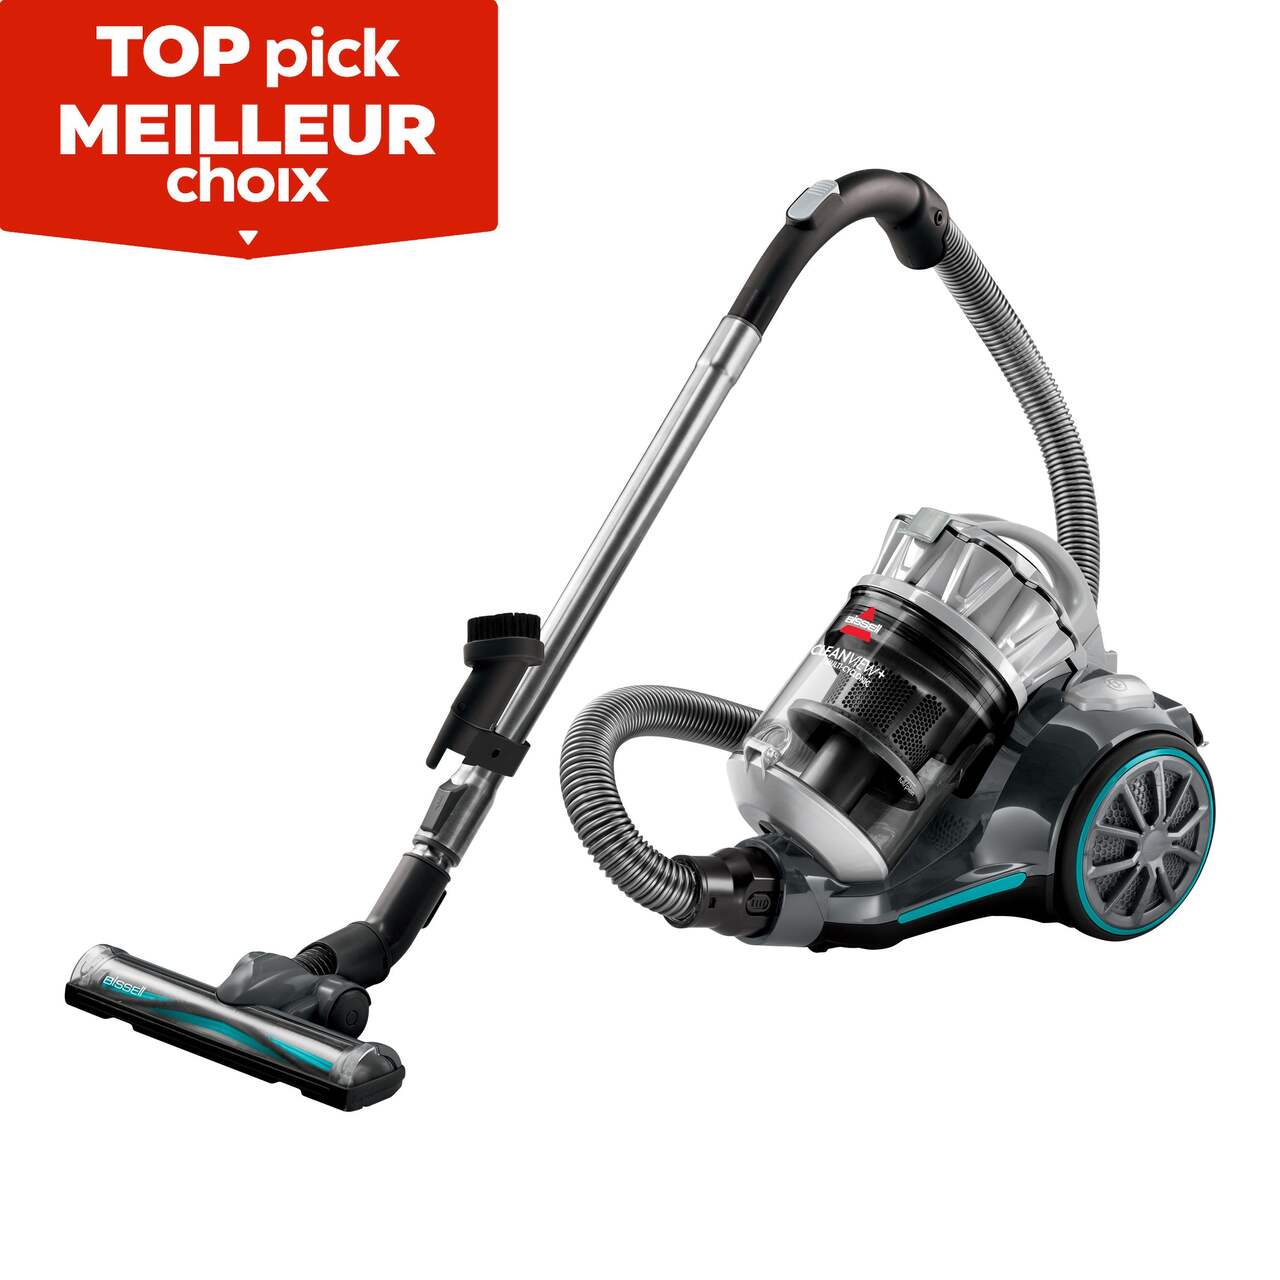 https://media-www.canadiantire.ca/product/living/cleaning/vacuums-and-floorcare/0438175/bissell-cleanview-plus-bagless-canister-cb84ce92-ba35-4b1d-a8f2-d2874510e154-jpgrendition.jpg?imdensity=1&imwidth=640&impolicy=mZoom